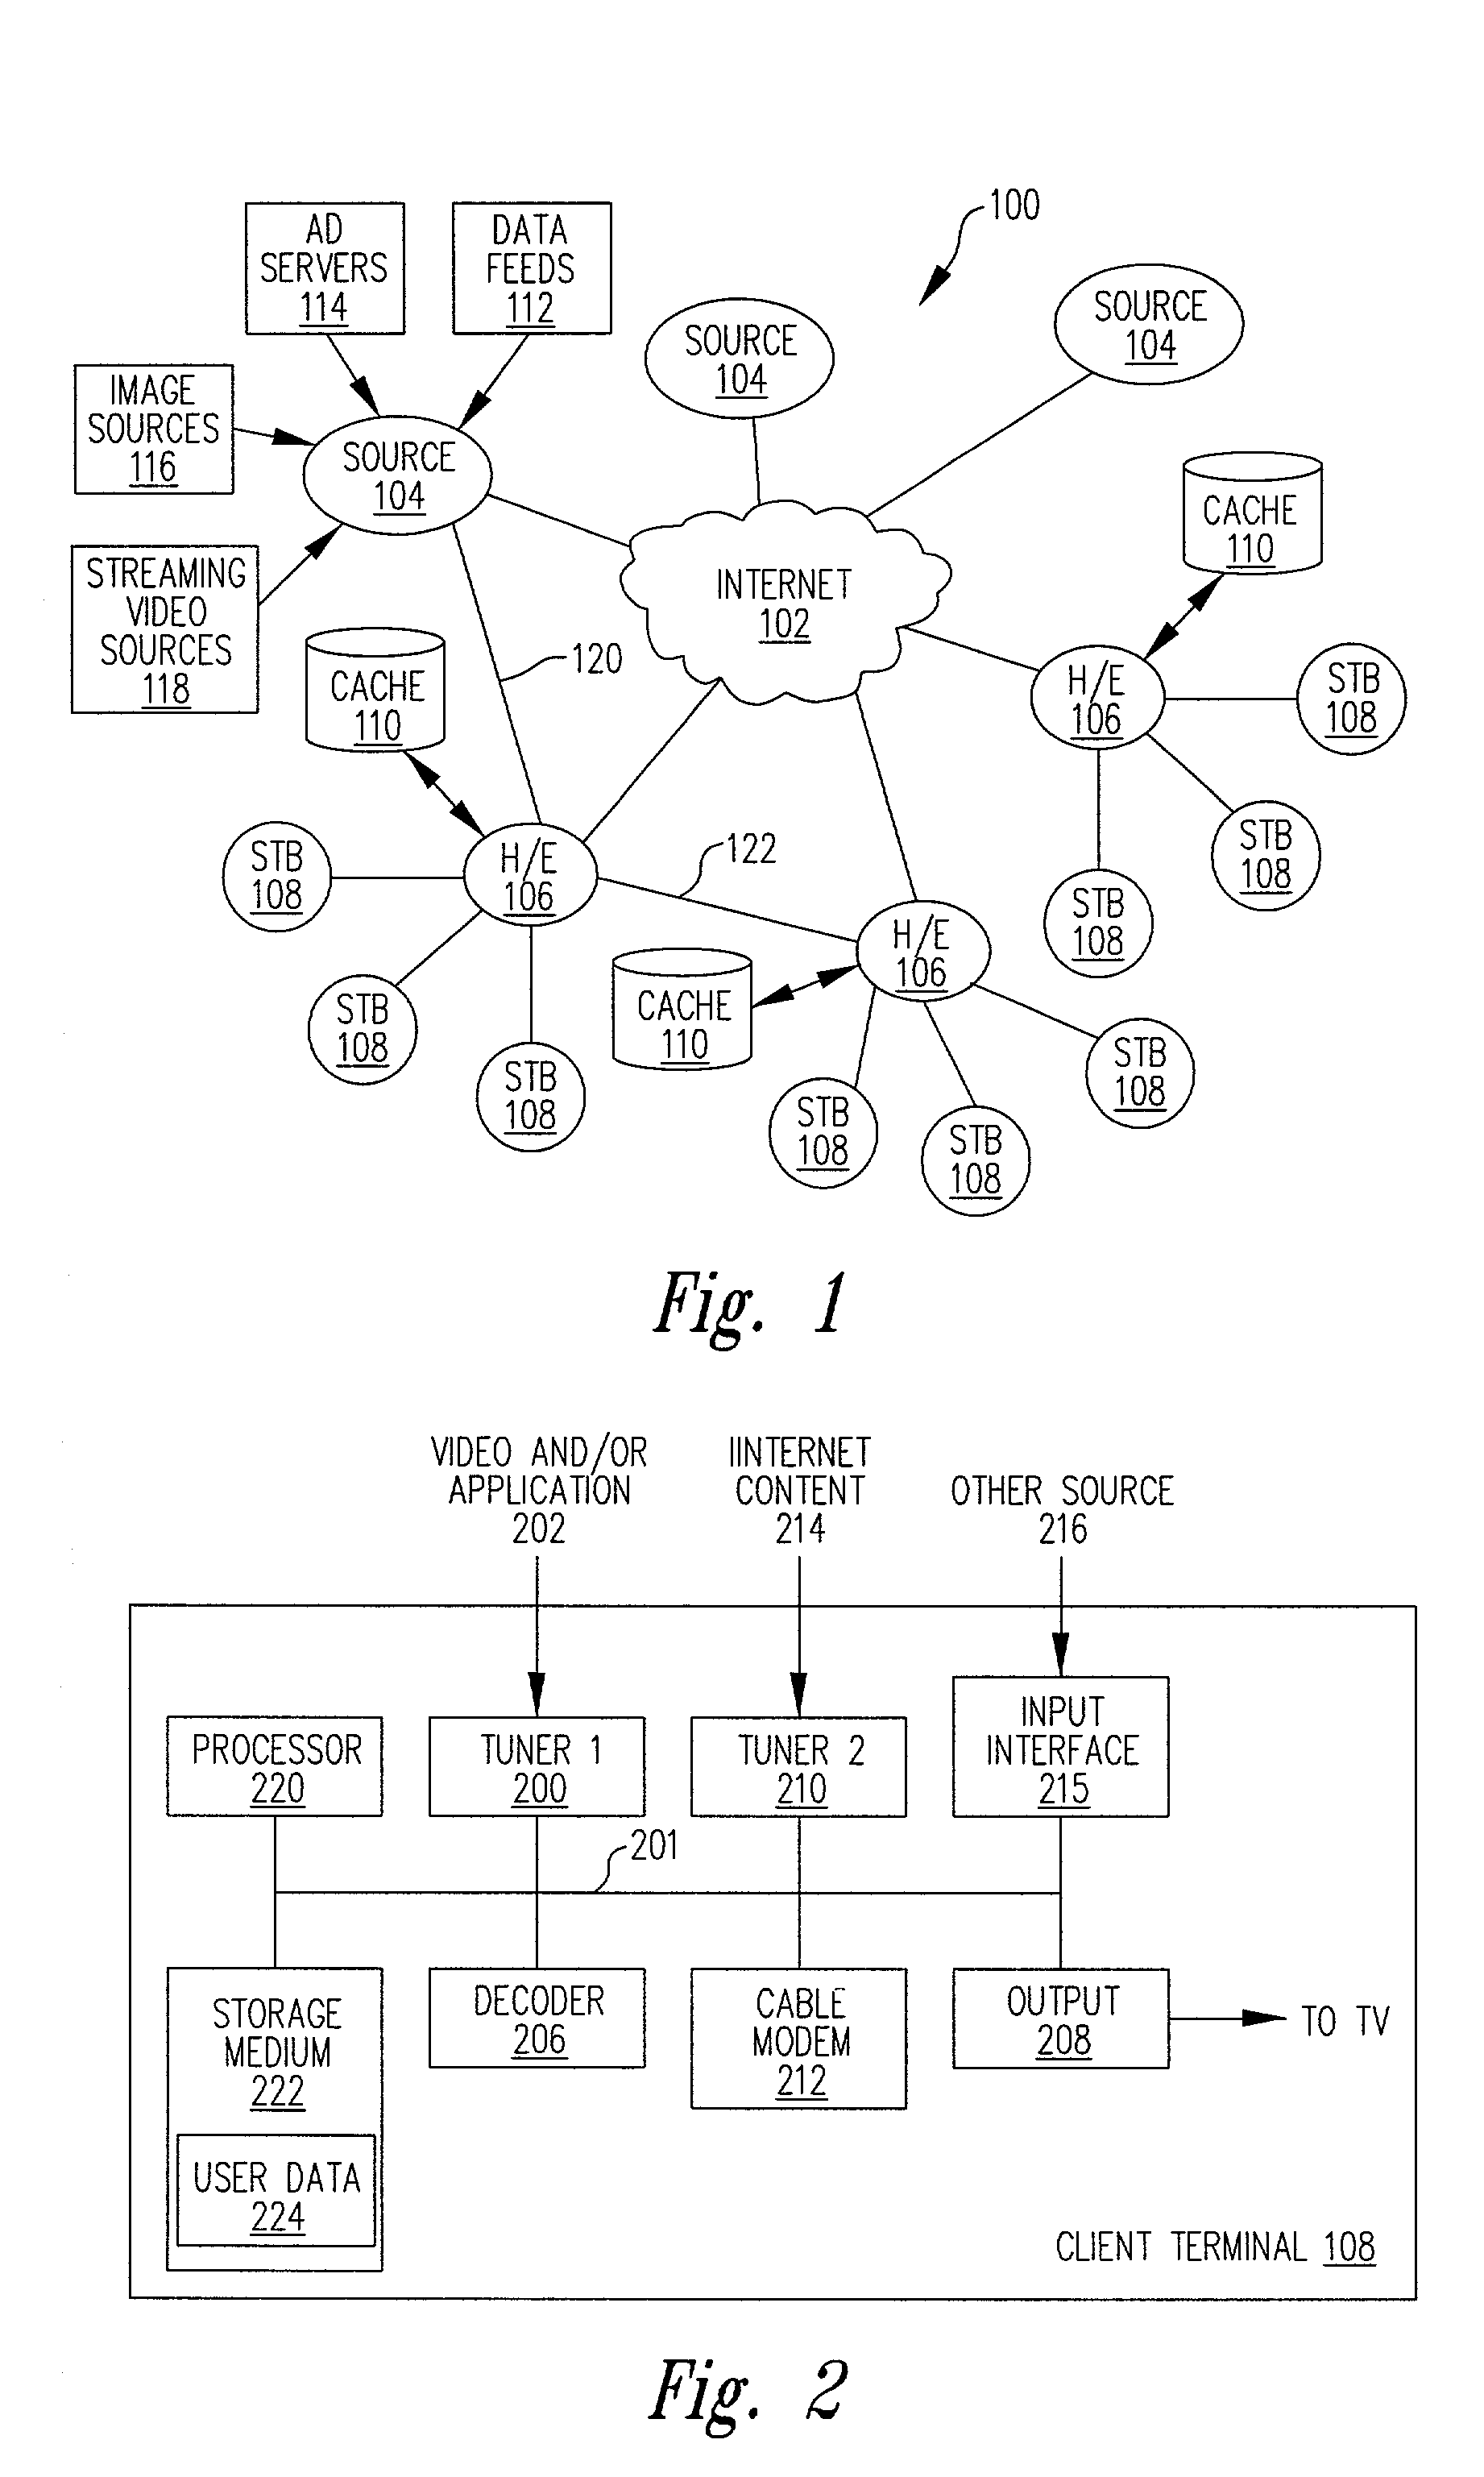 System and method to provide customized graphical user interfaces via an interactive video casting network